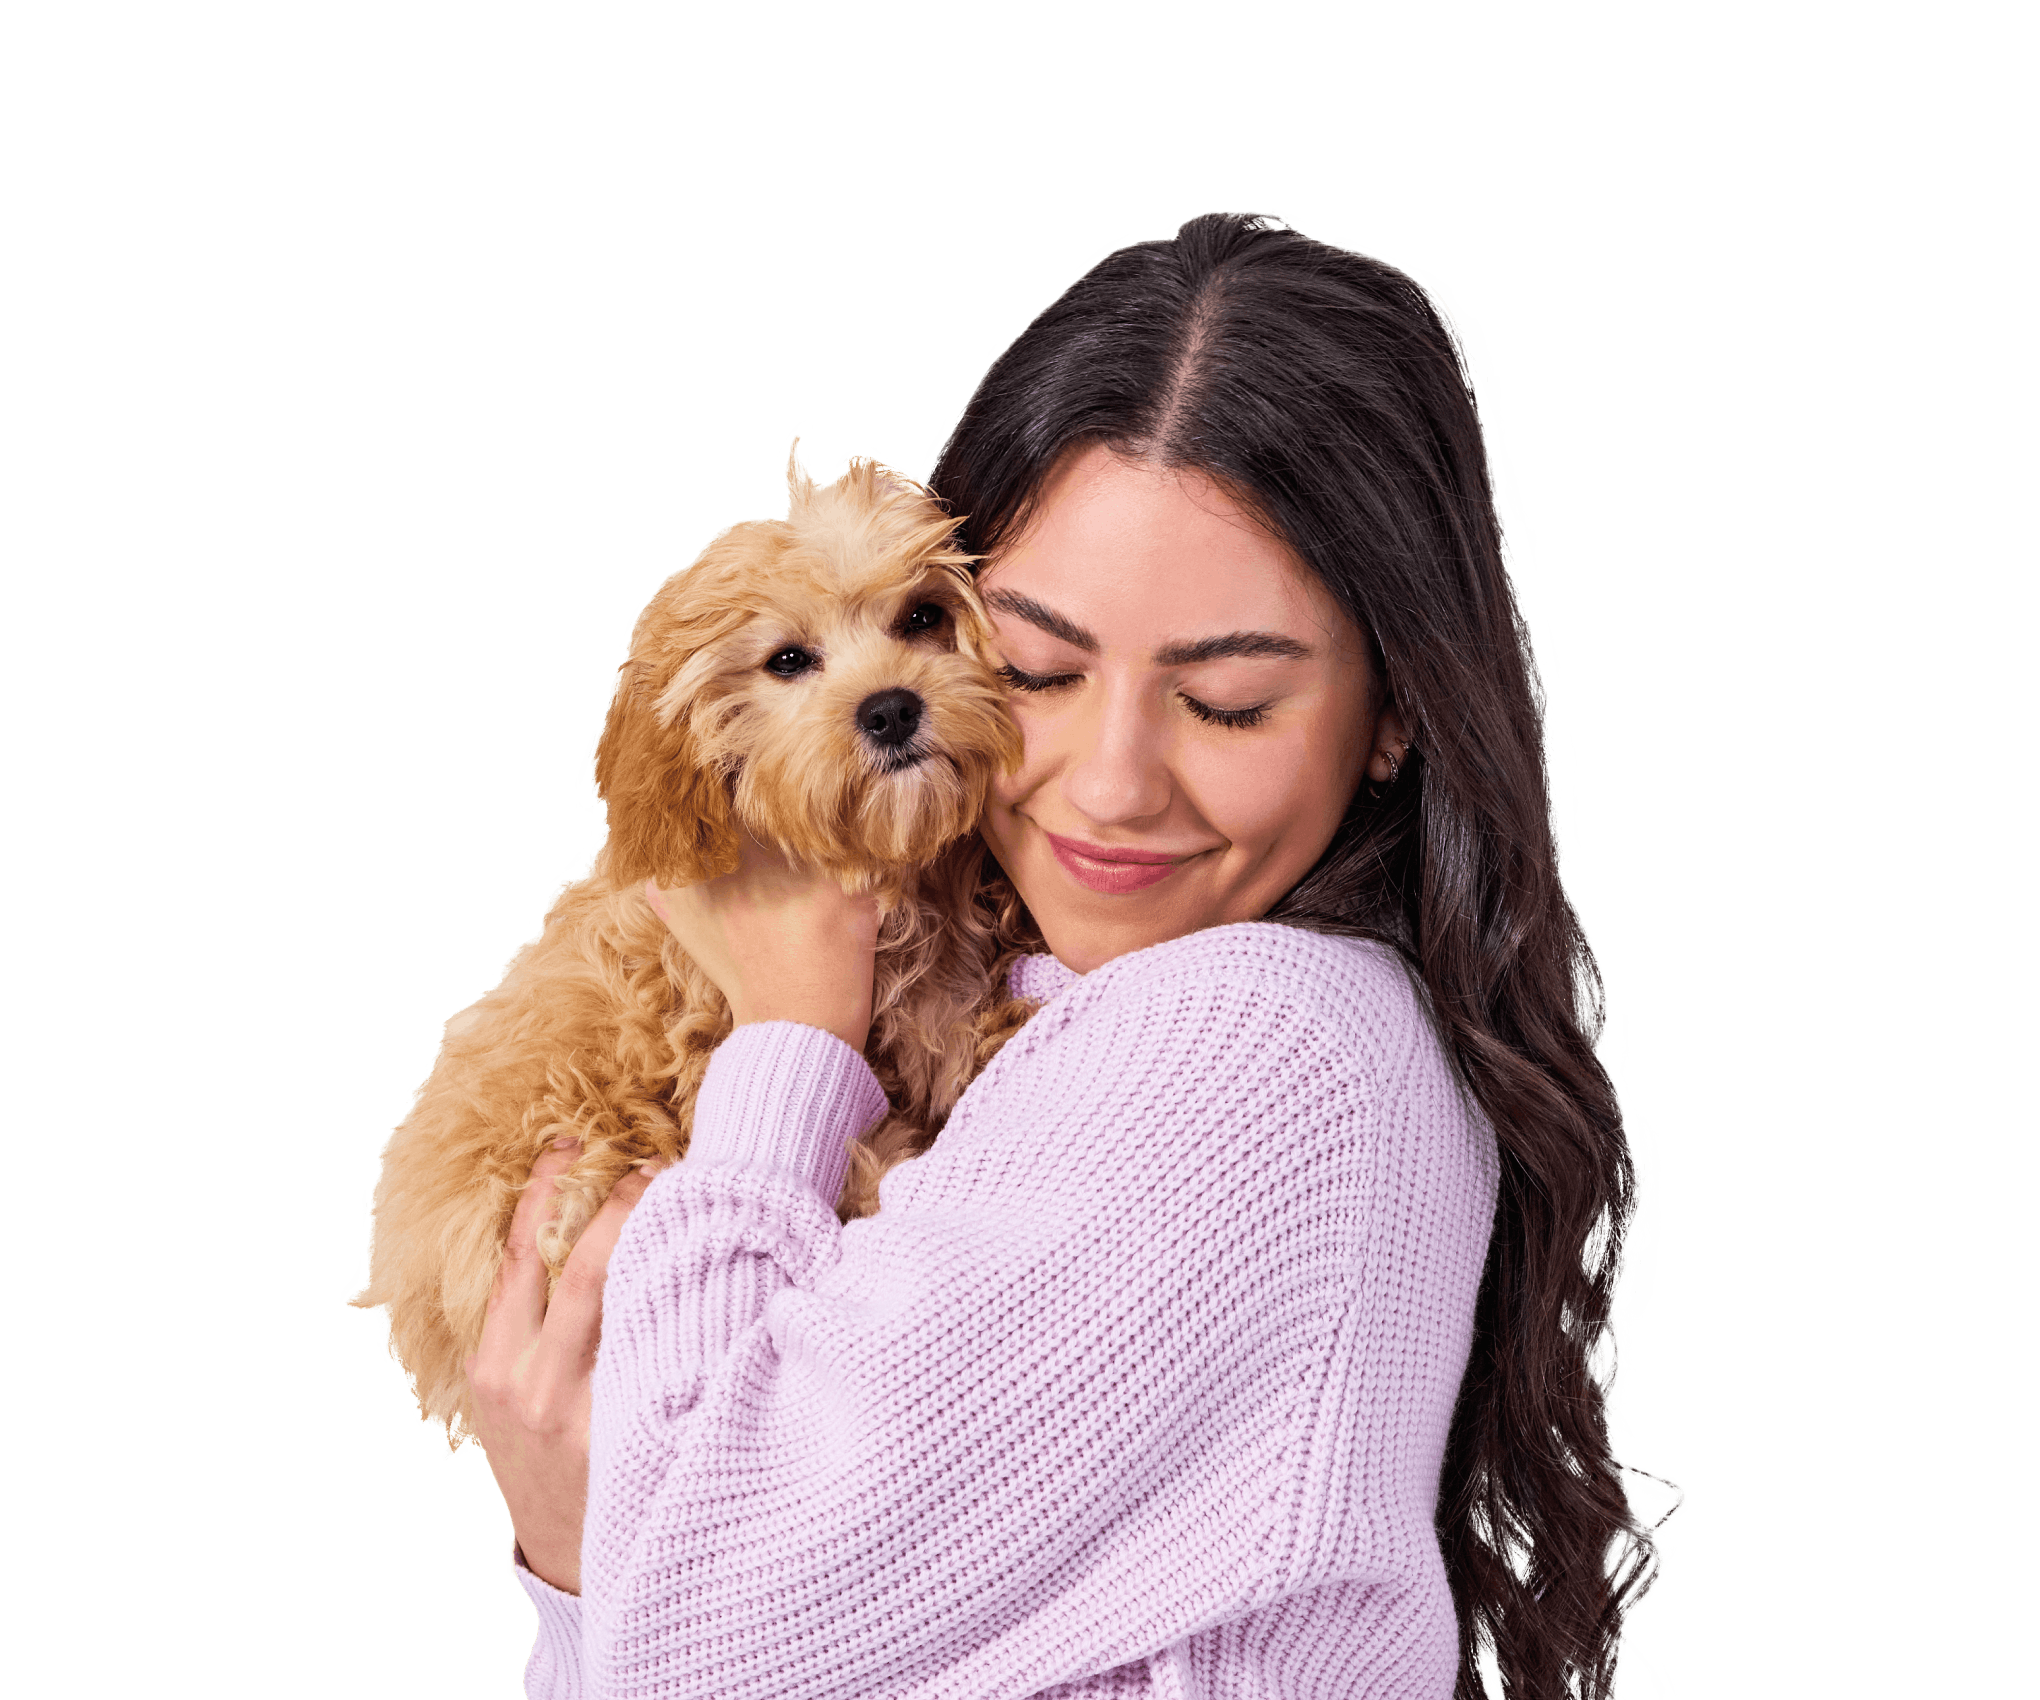 Beautiful dark-haired young woman hugging a cute fluffy light brown poodle mixed breed dog